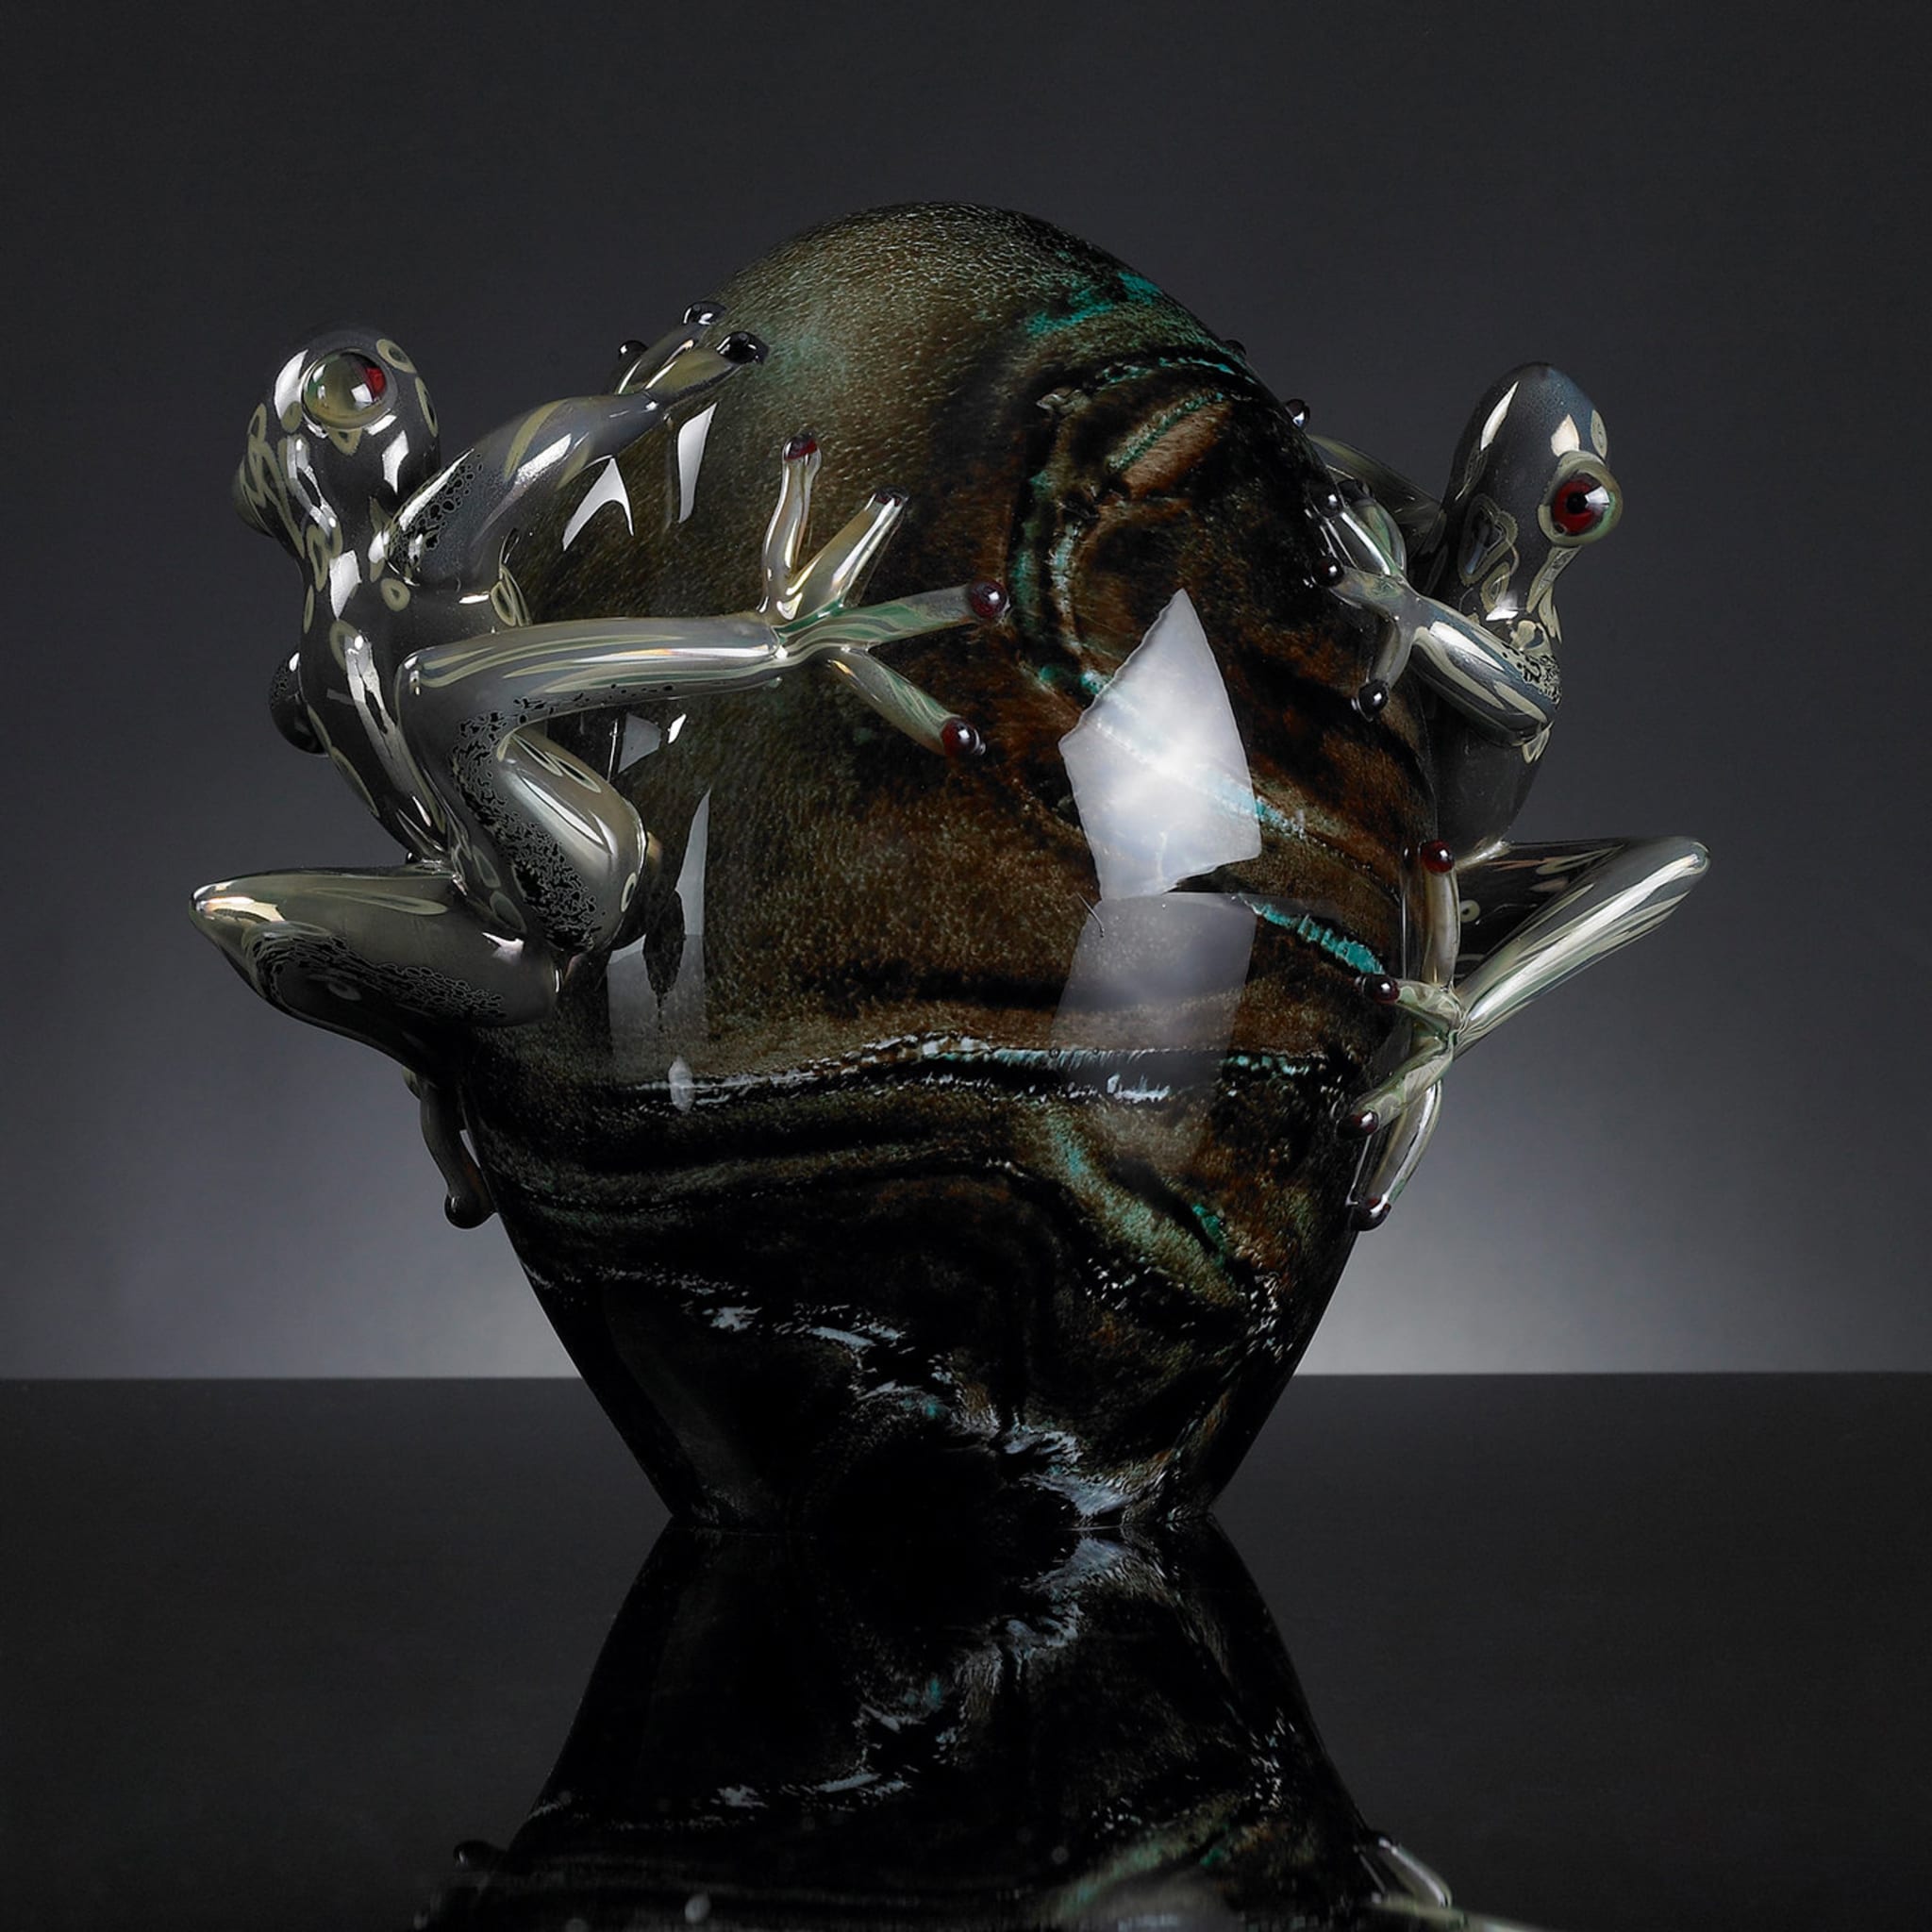 Glass Egg With Gray Frogs - Alternative view 1